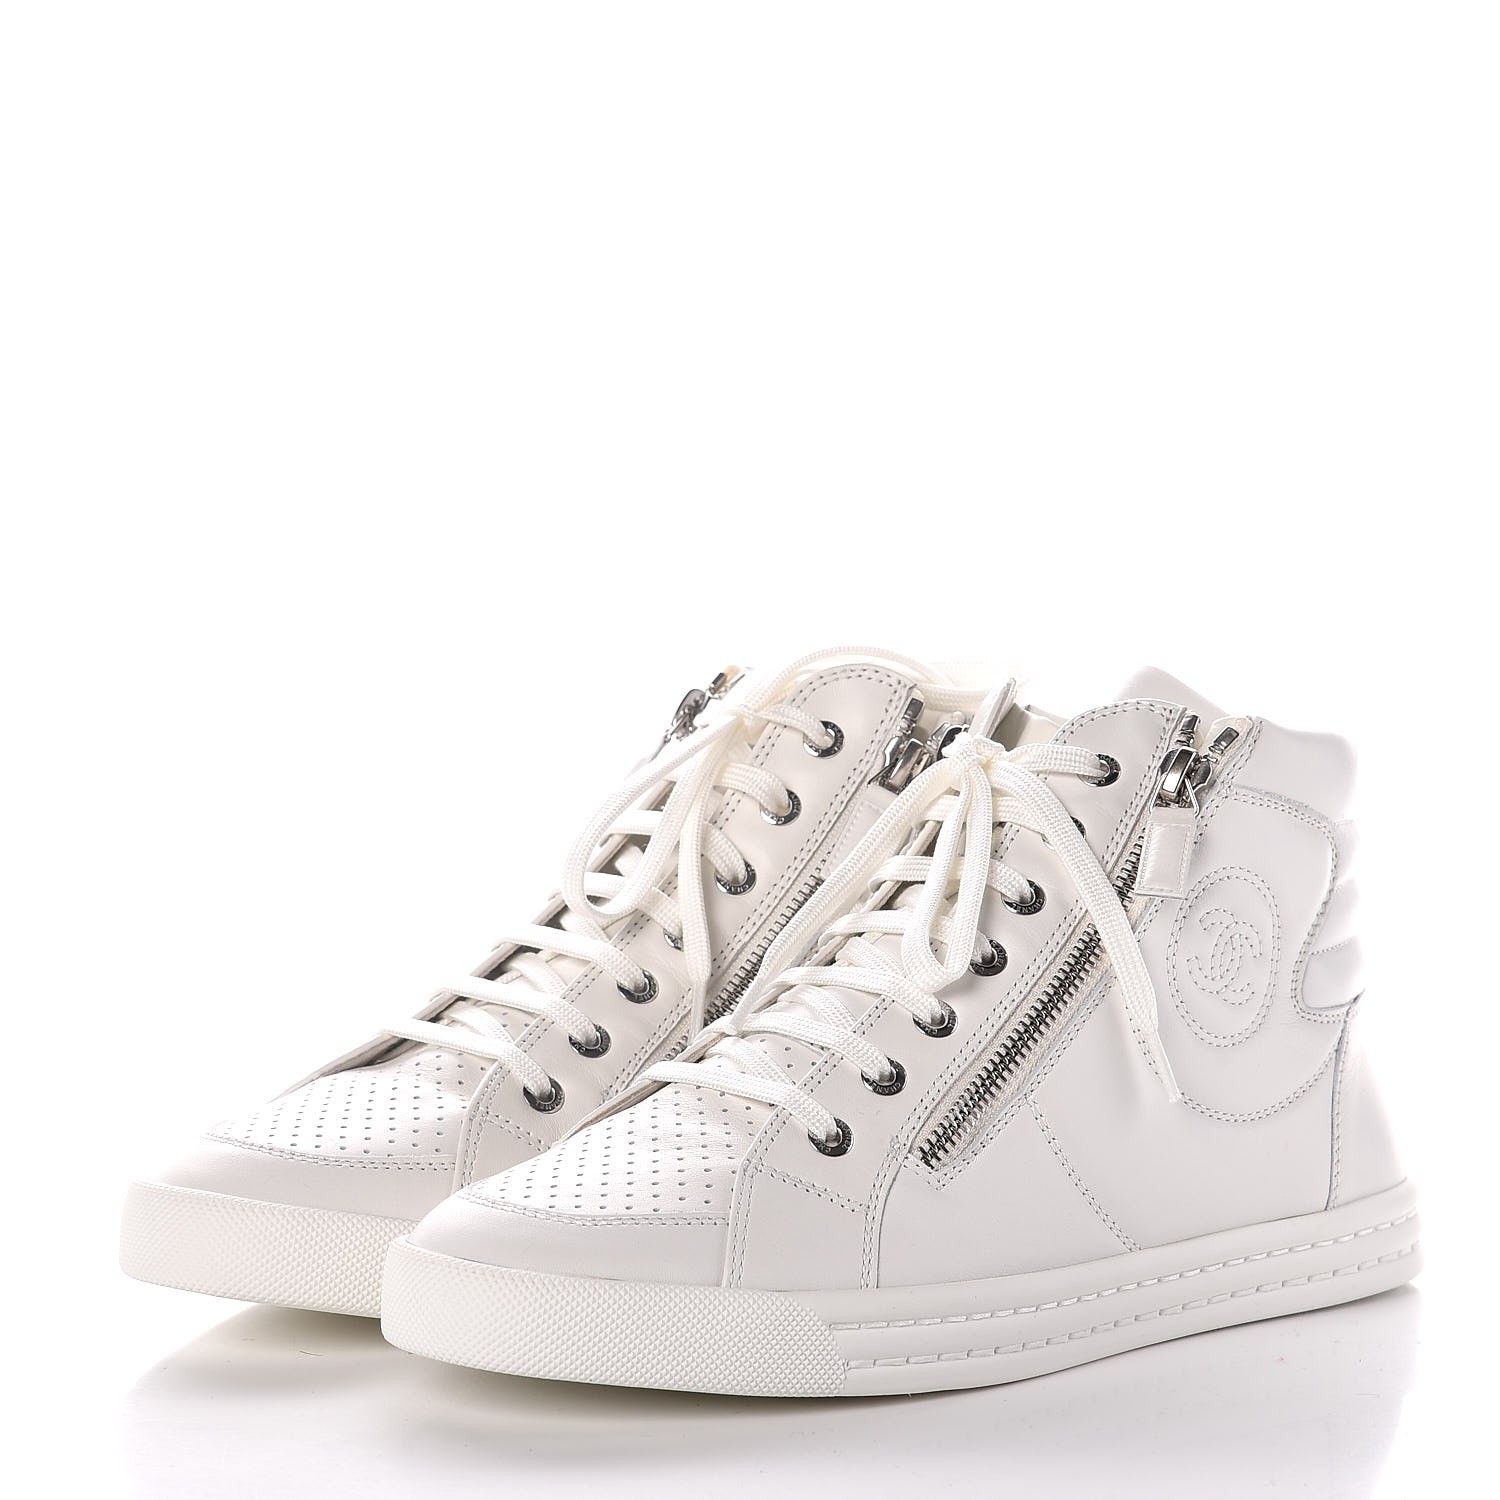 CHANEL Calfskin High Top CC Sneakers 39 White 303752